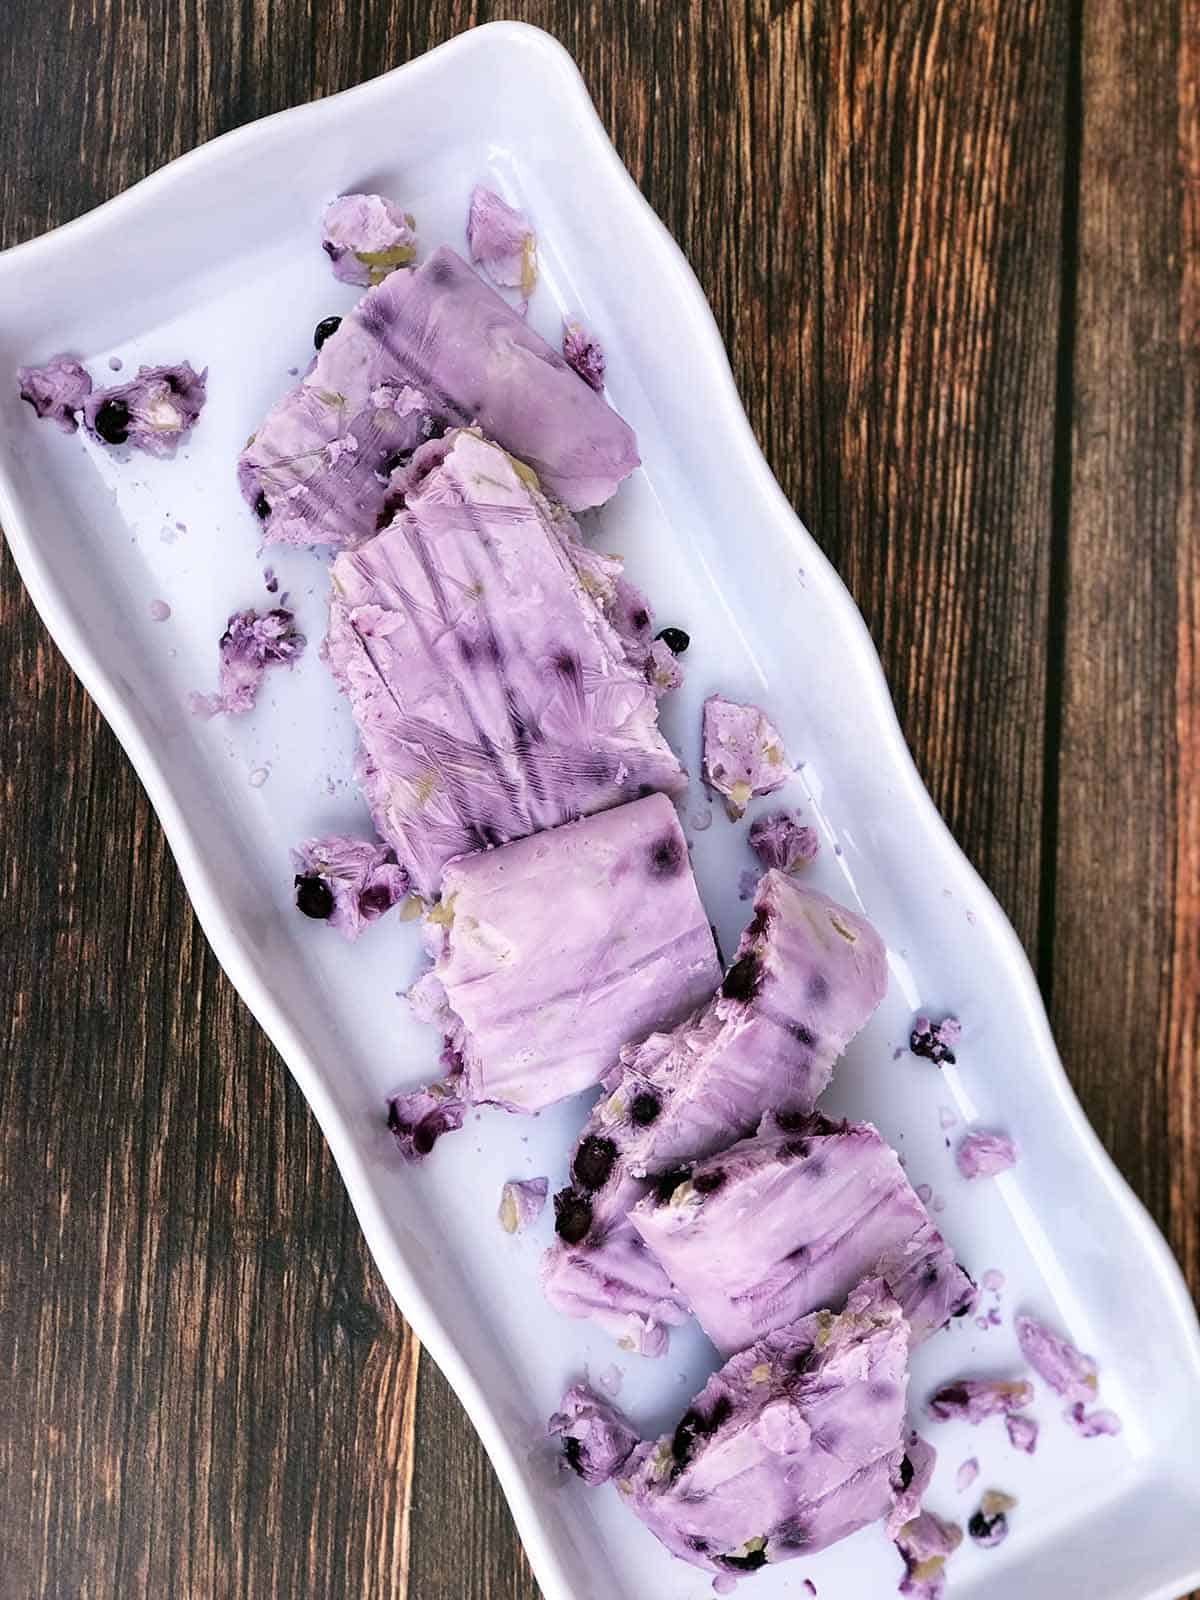 Frozen Yogurt Bark with Blueberries & Almonds on a white serving tray